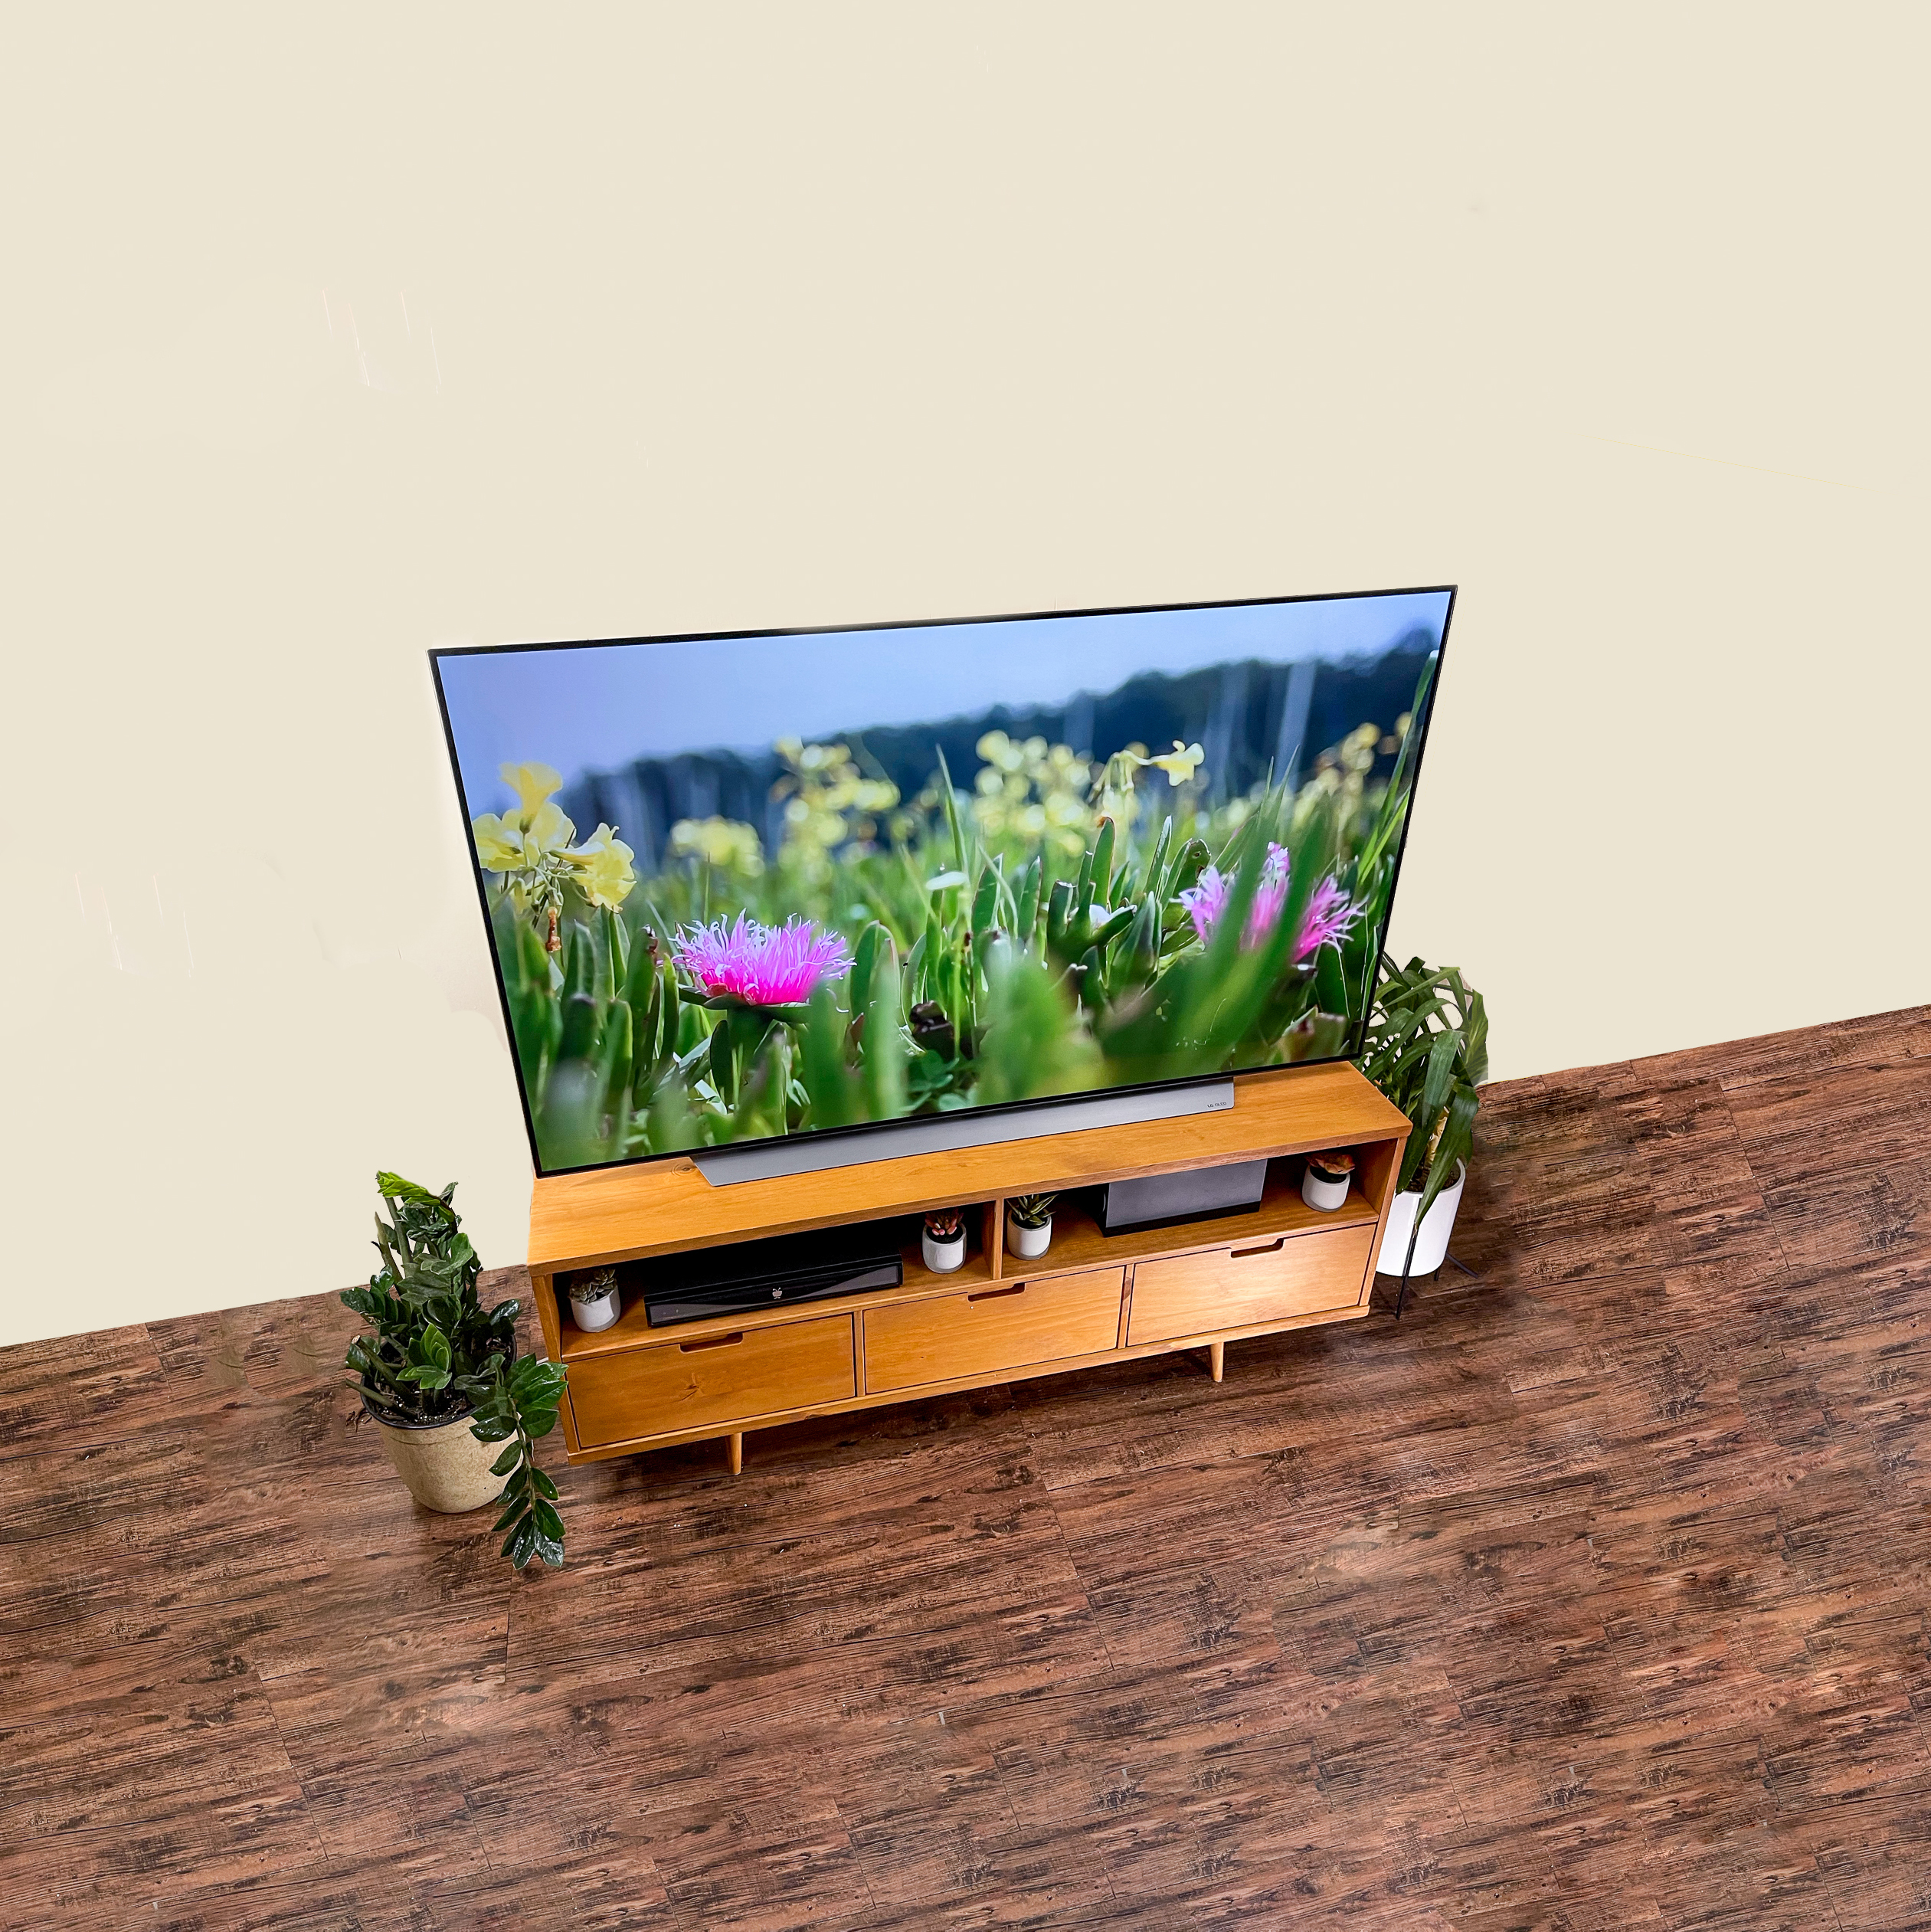 LG C1 OLED TV review: The best high-end TV for the money     - CNET